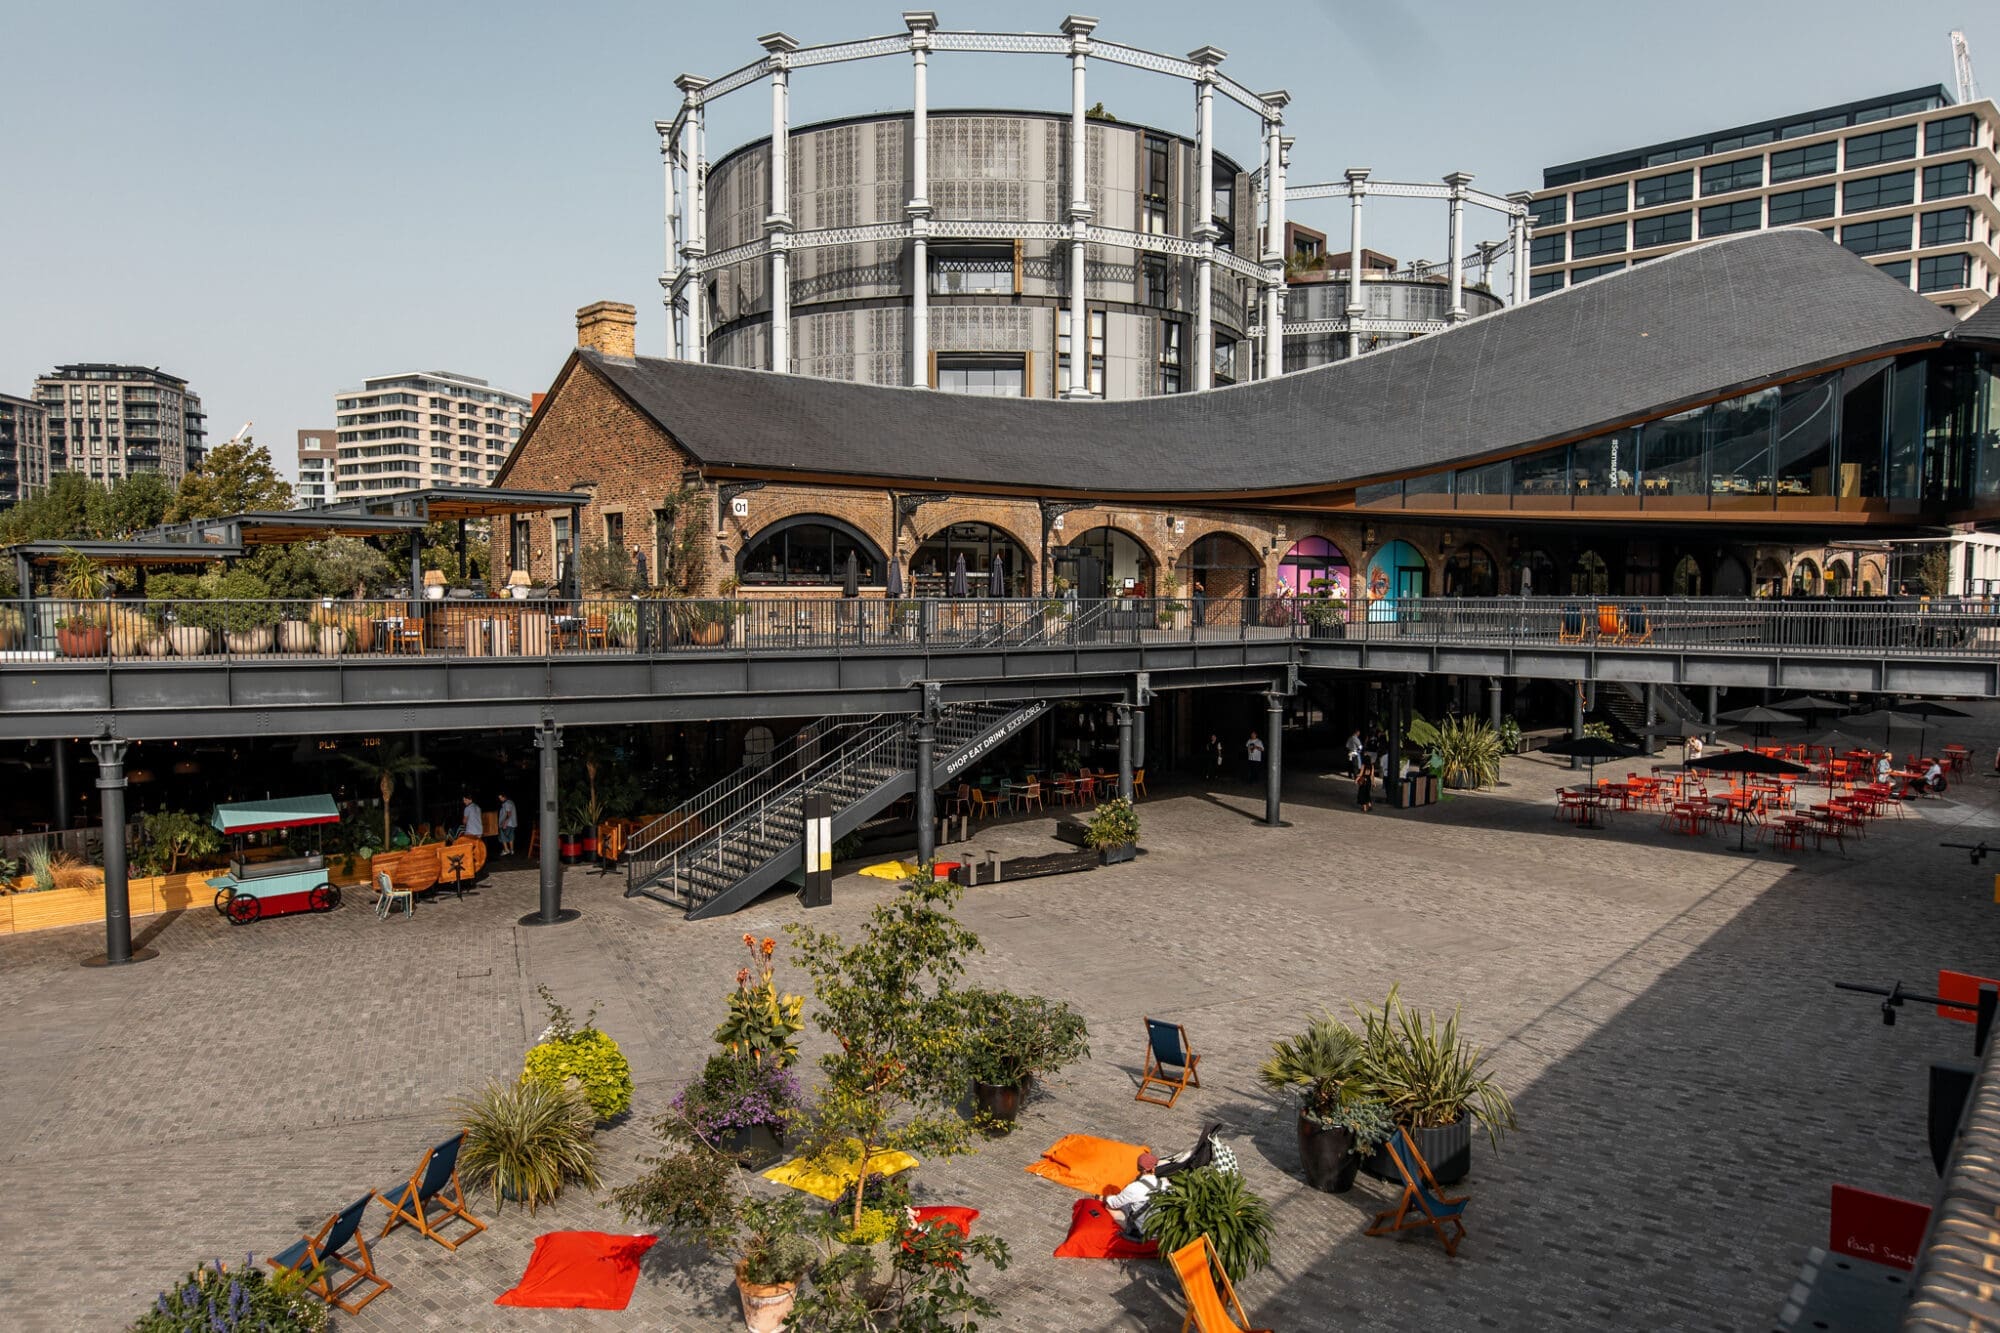 A photograph looking out over Coal Drops Yard, King's Cross London